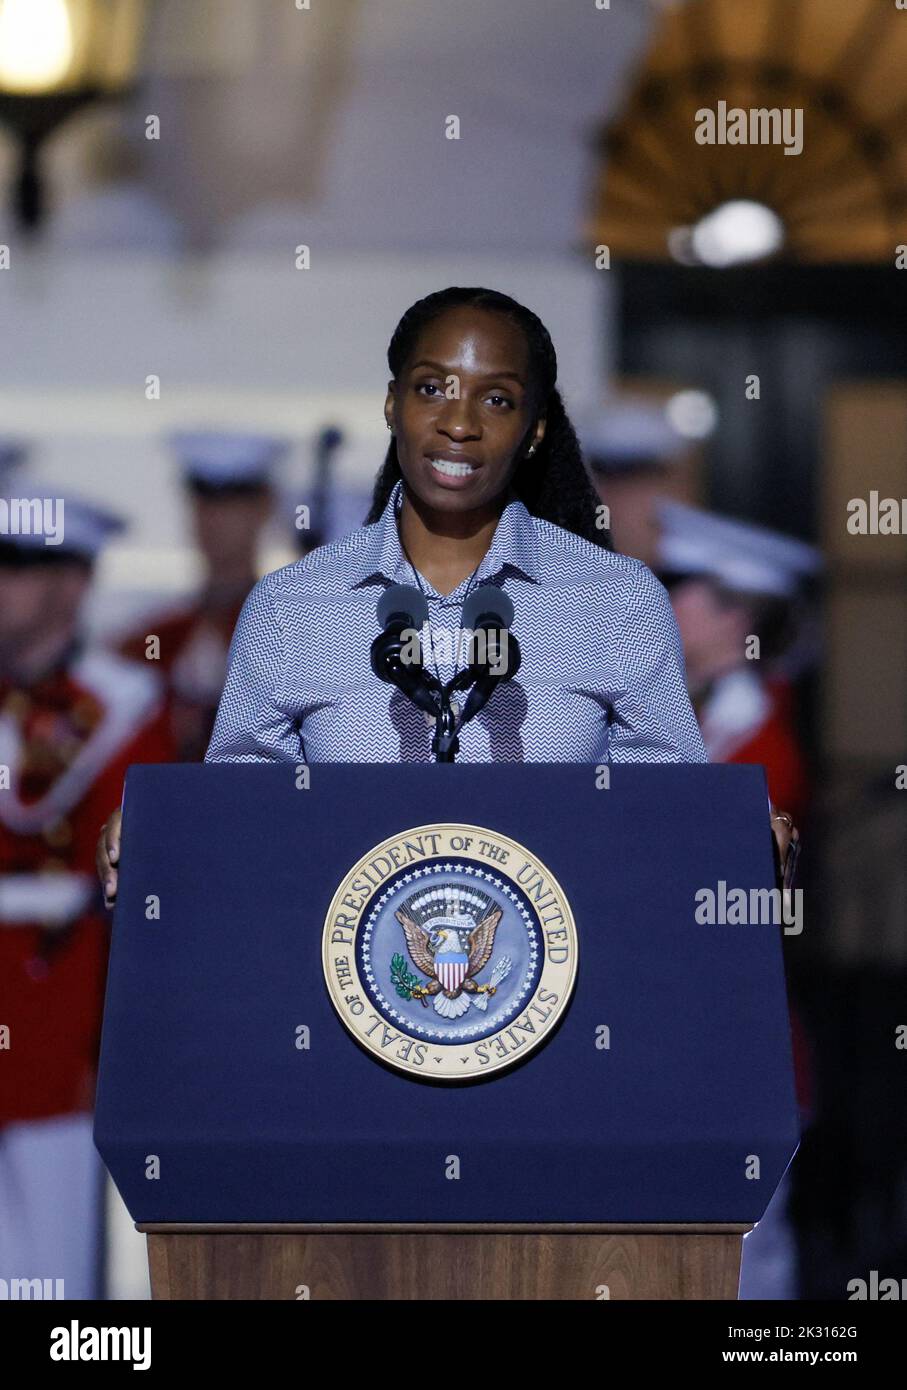 Athen White, Director of Youth Development & Community Engagement, Supporting and Mentoring Youth Advocates and Leaders (SMYAL) attends a performance by British rocker Elton John at the White House in Washington, U.S., September 23, 2022. REUTERS/Evelyn Hockstein Stock Photo